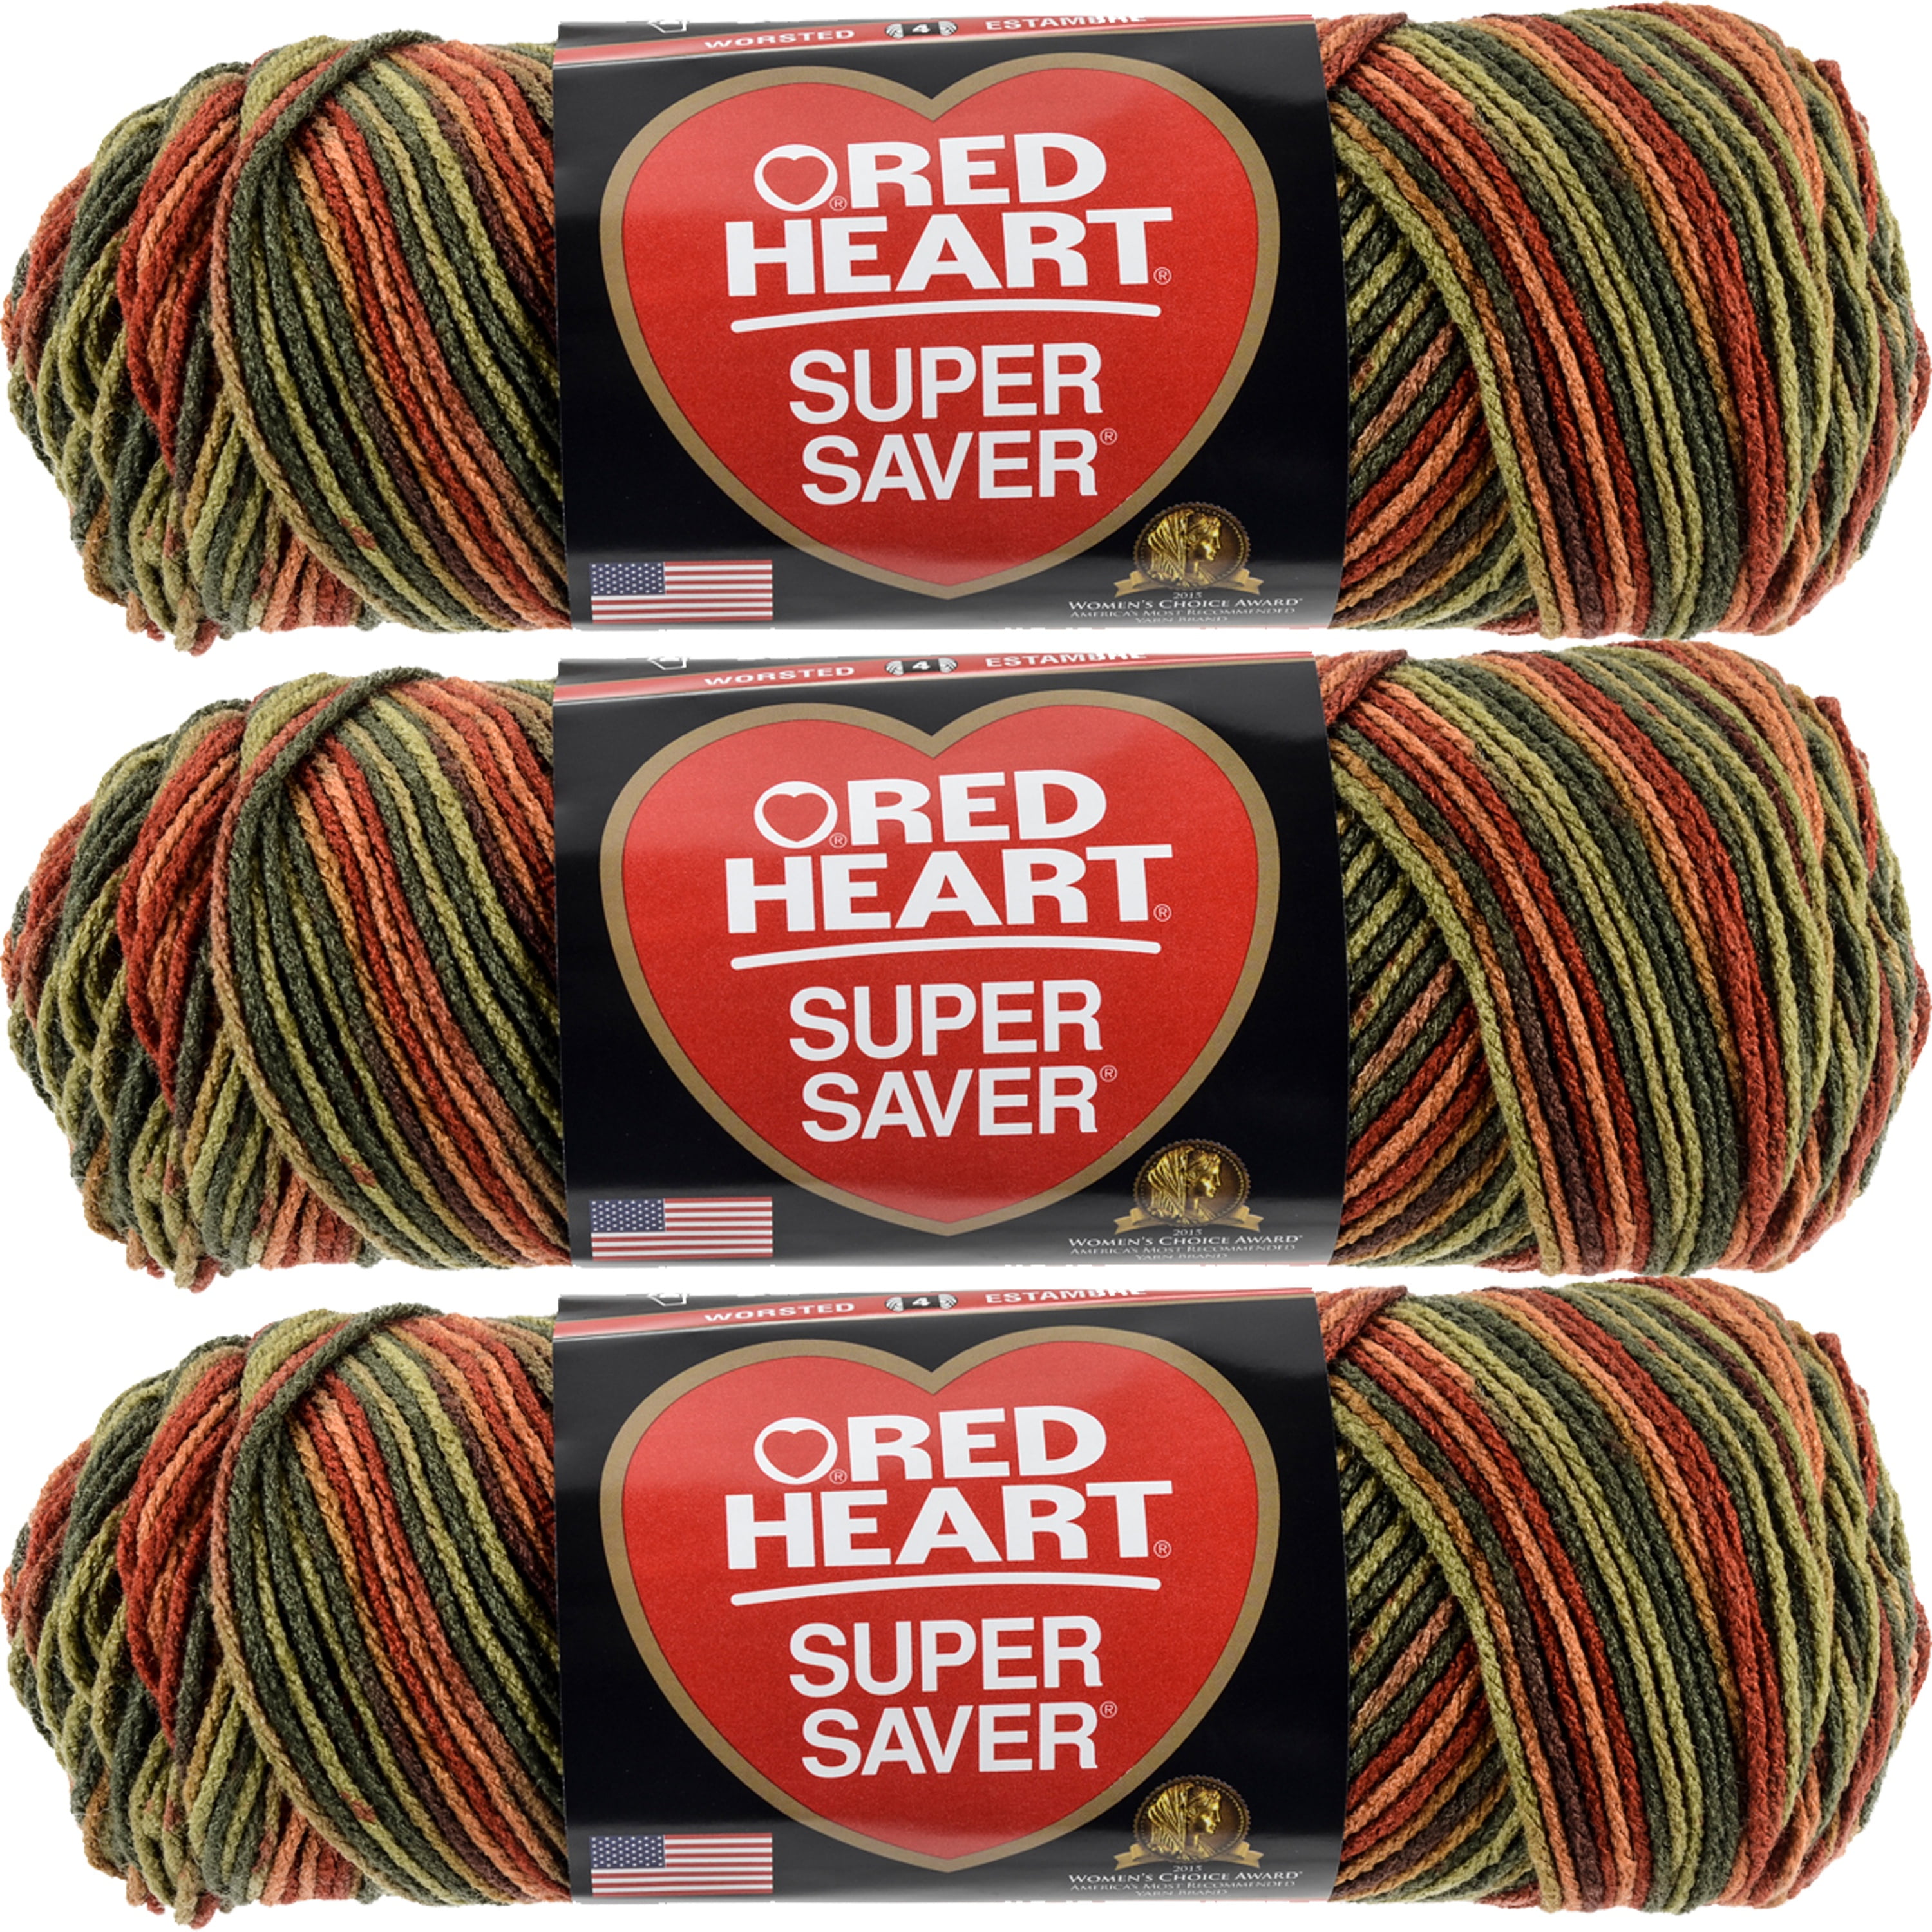 Red Heart Super Saver Yarn Fall, Multipack of 3